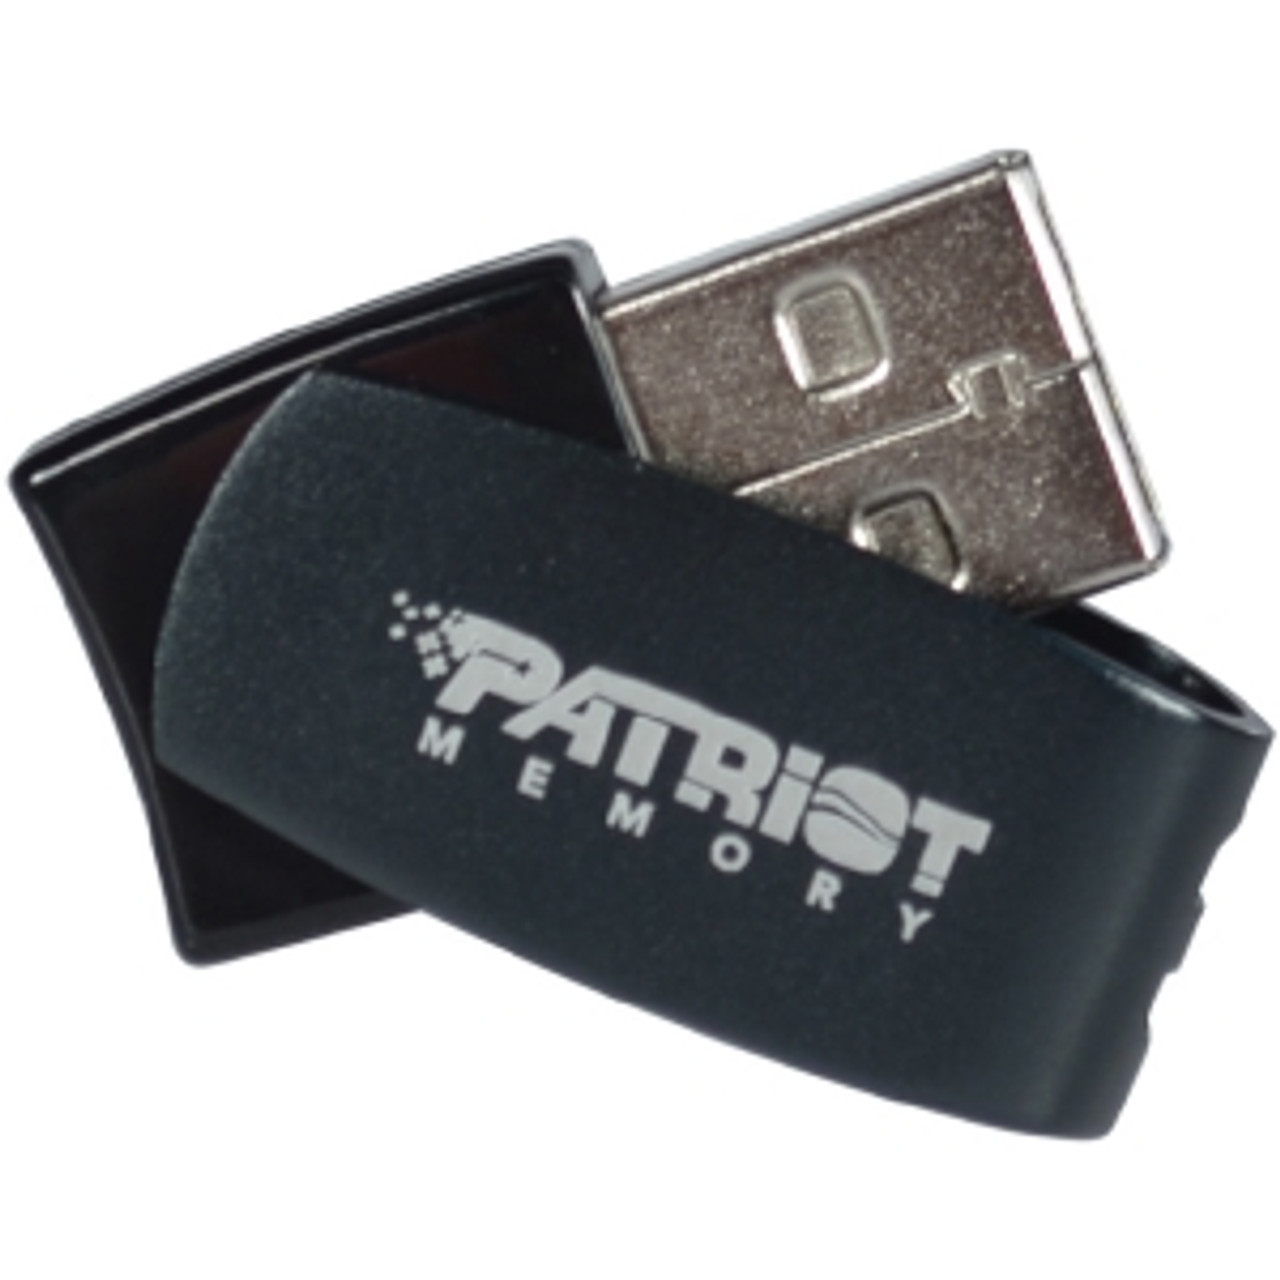 PSF32GAUSB - Patriot Memory Signature Xporter Axle 32 GB USB 2.0 Flash Drive - Red - 1 Pack - External